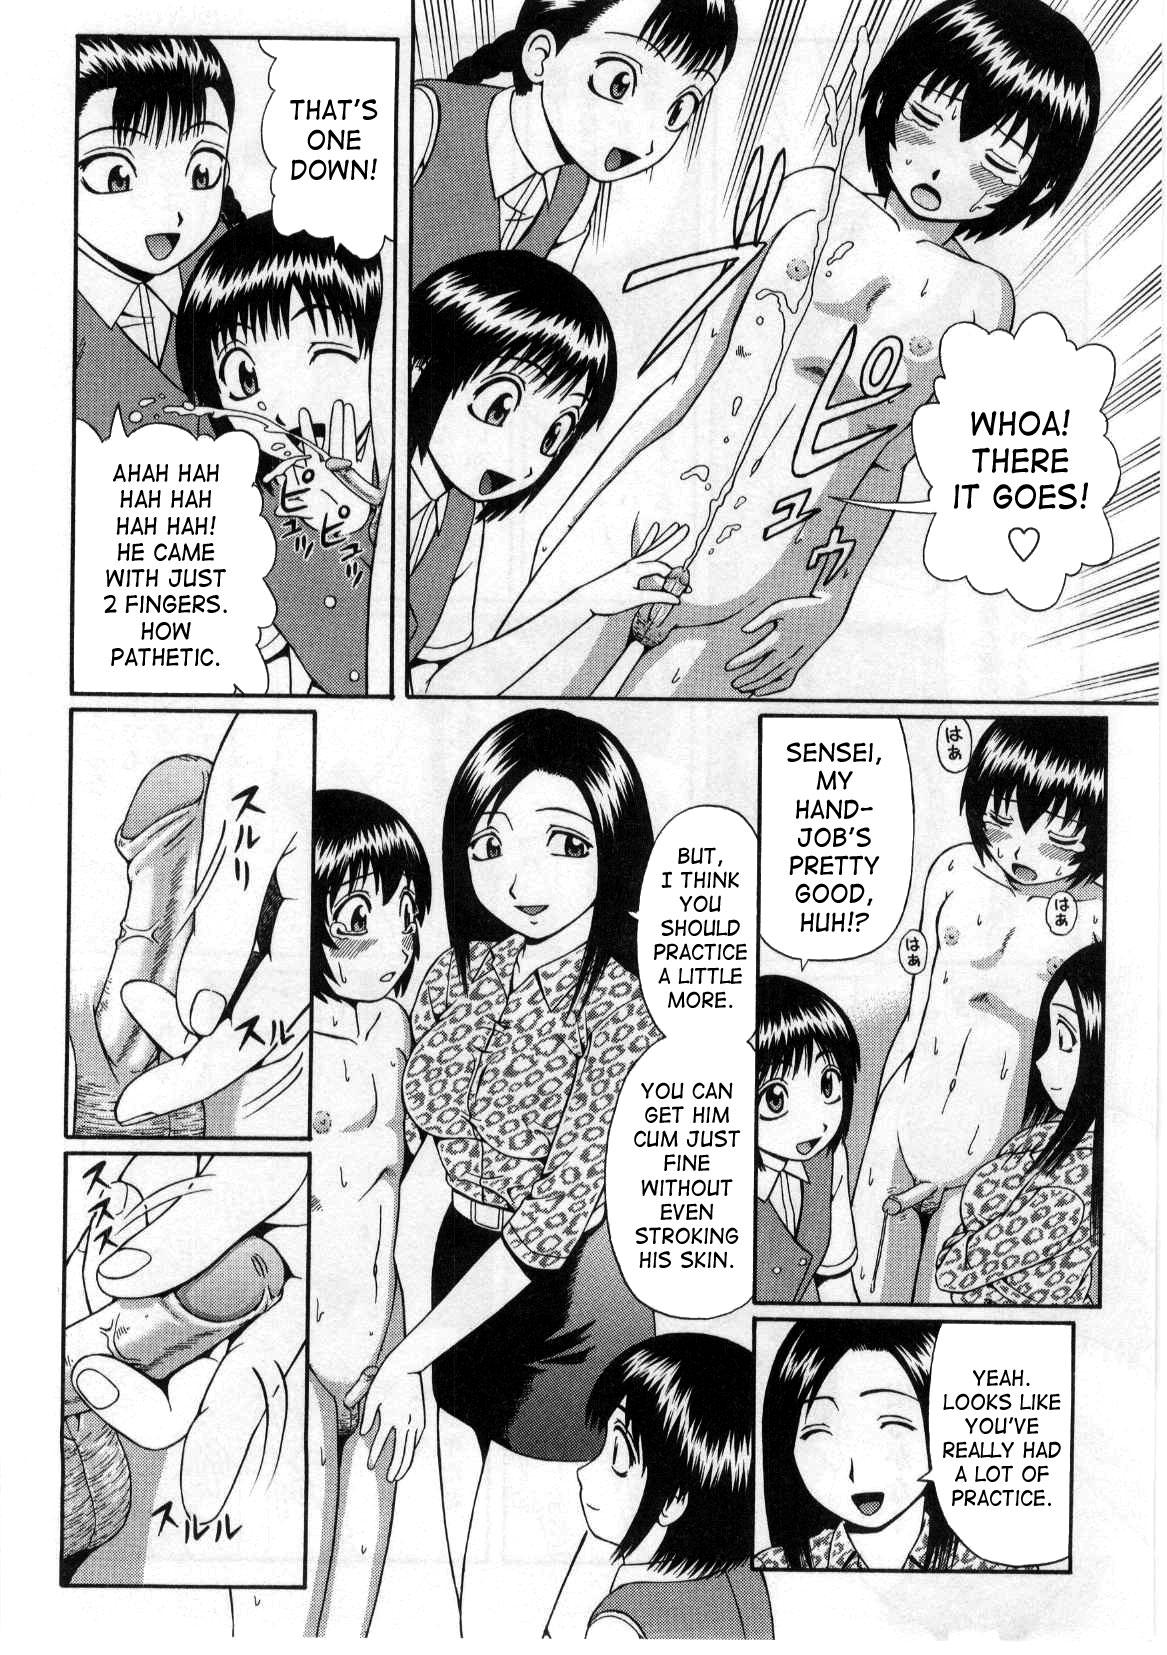 Women Suisen no Jouken | Condition of Recommendation Punished - Page 6